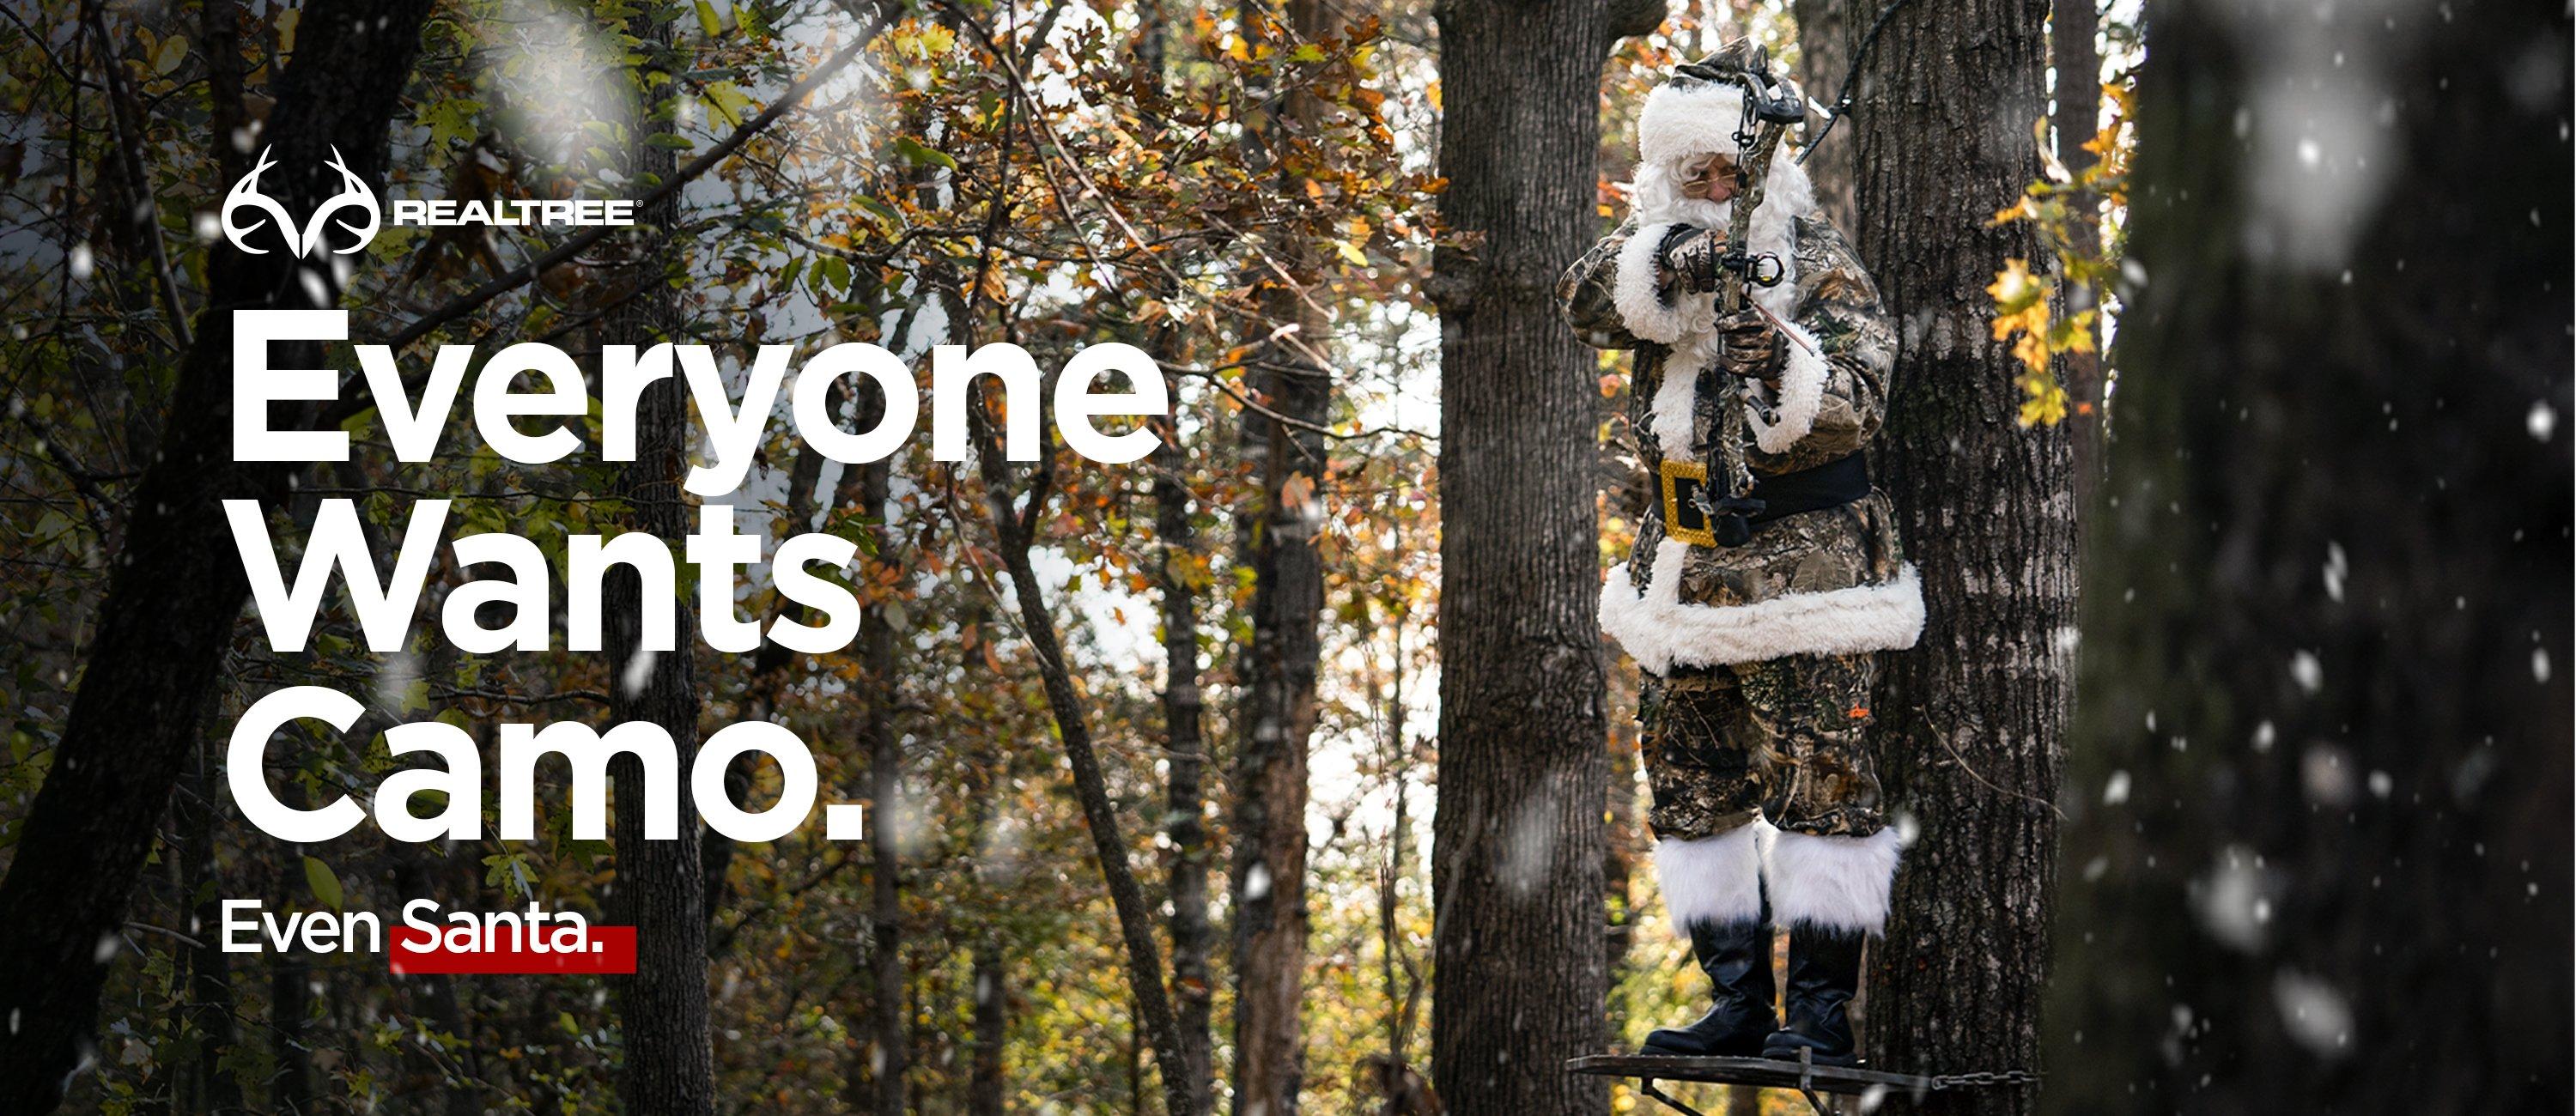 Get your camo gifts, stocking stuffers, and other goodies at the Realtree store.